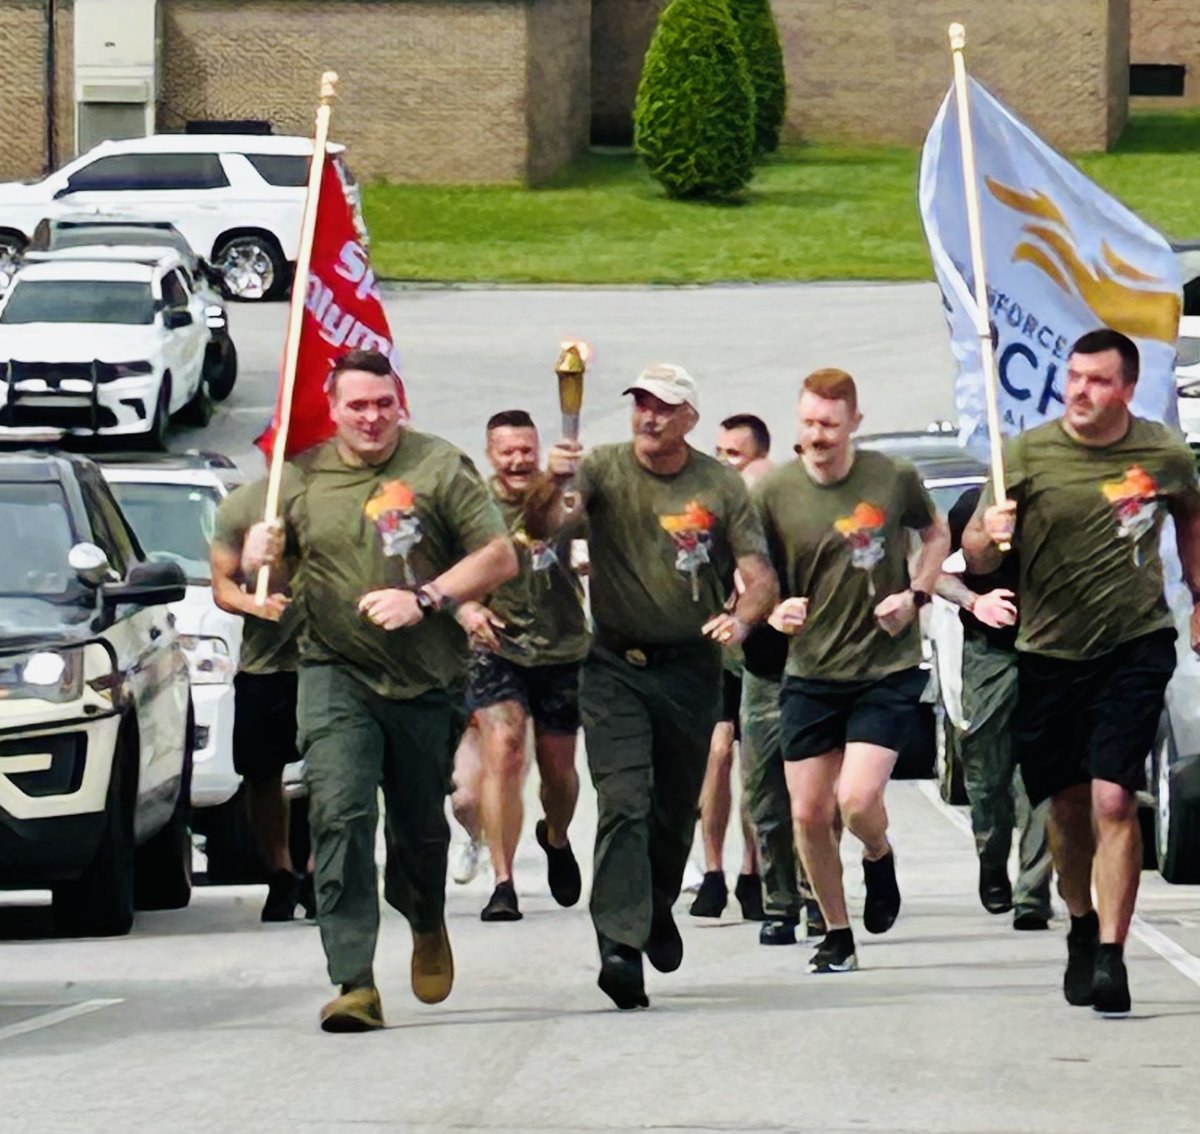 Trooper Boshears and Trooper Smith participated in the Law Enforcement Torch Run in Campbell County today. @SOTennessee